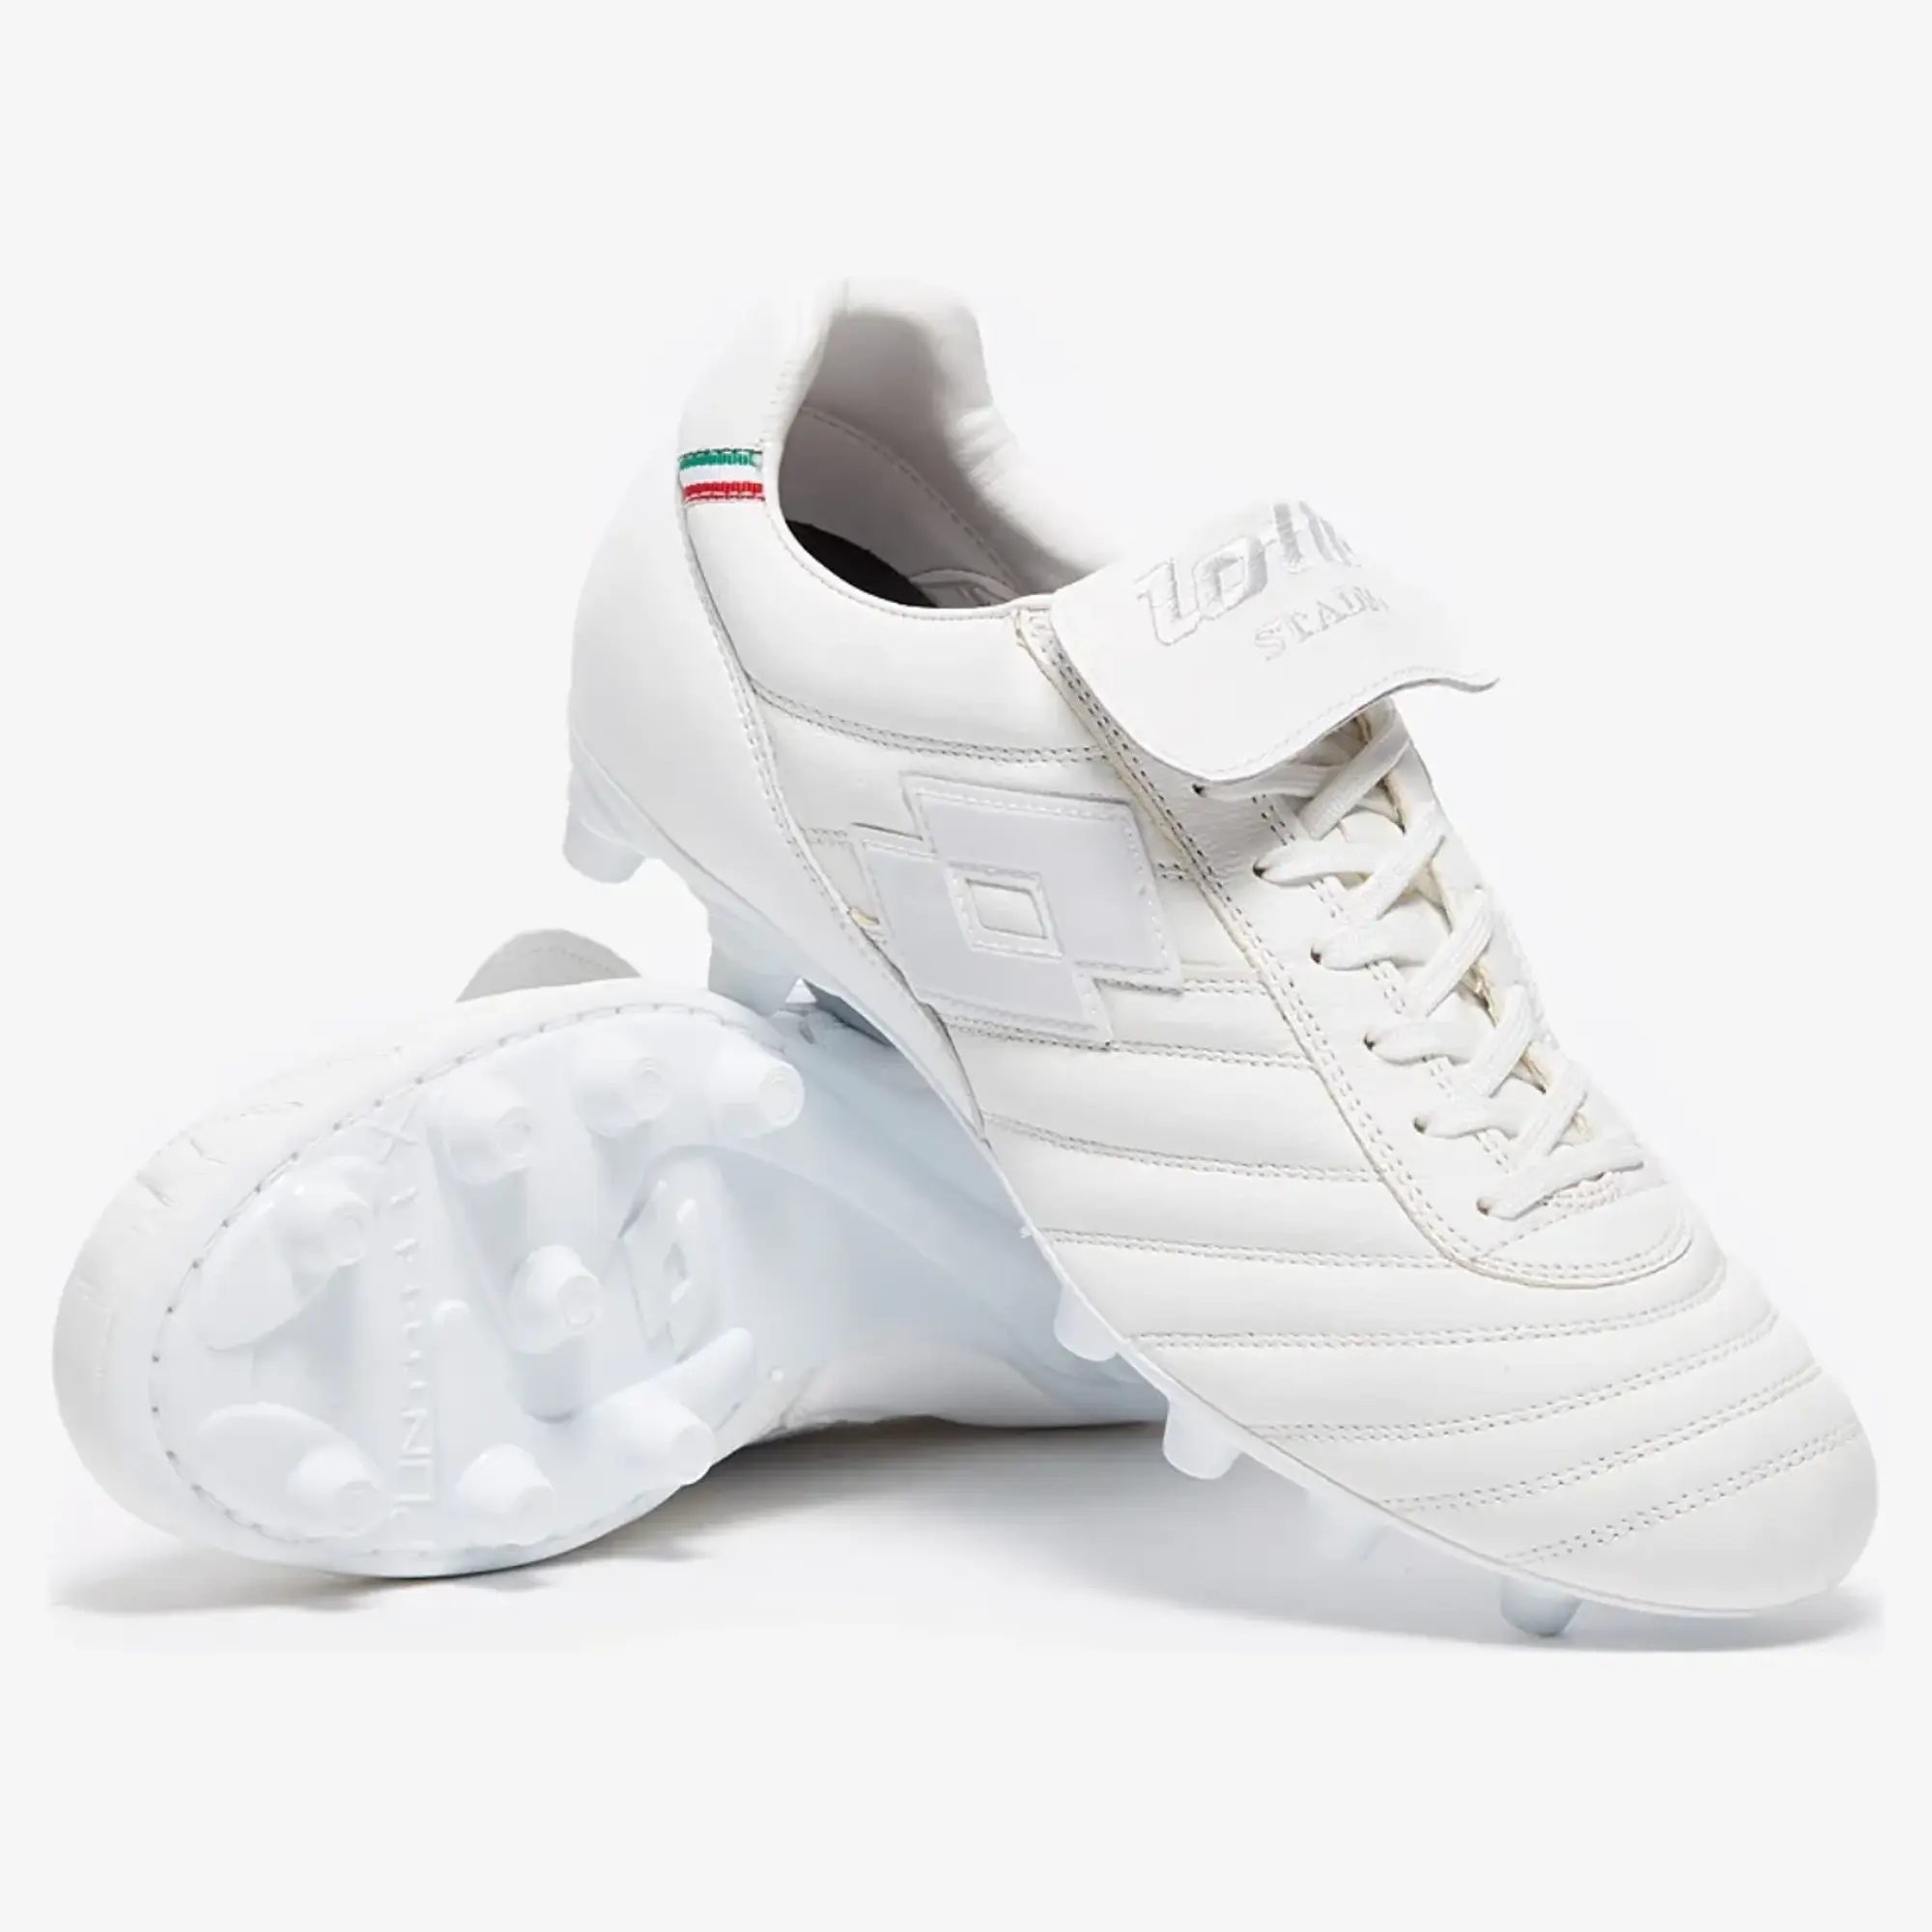 Lotto Stadio Made In Italy FG